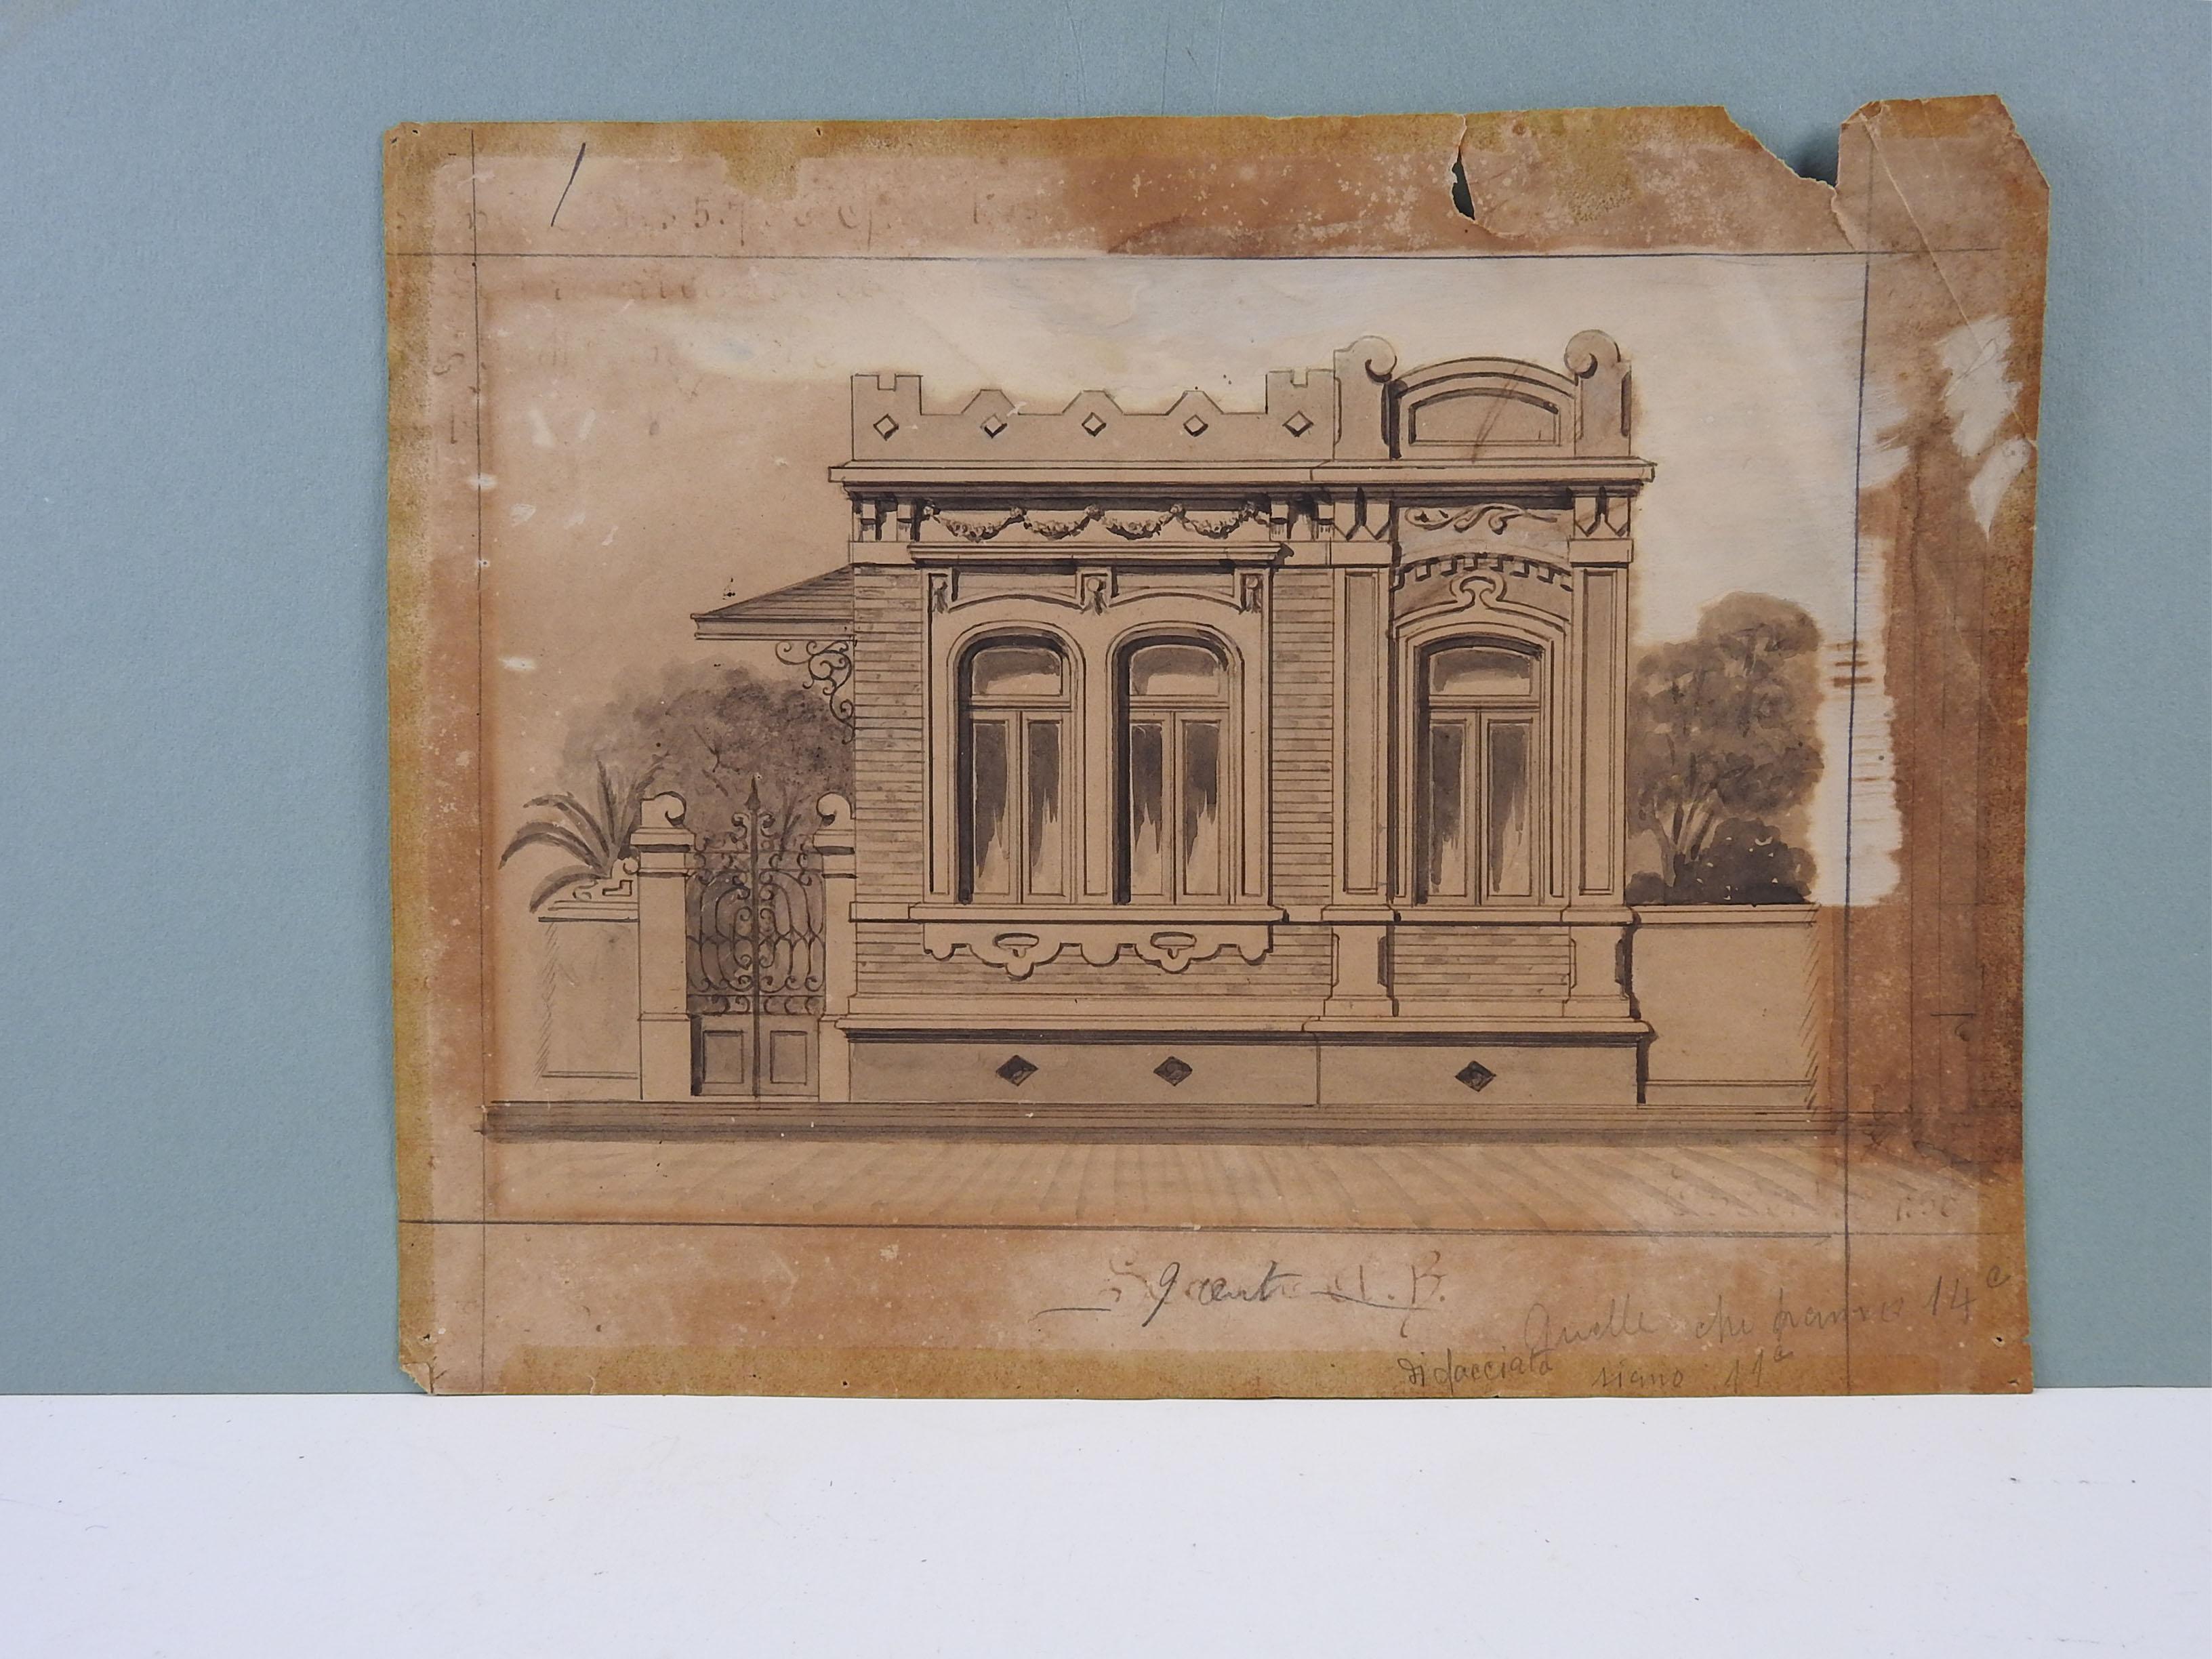 Architectural rendering in watercolor, gouache, and pencil on paper by Luiz Olivieri Italy/Brazil, circa 1900. Unsigned. Unframed, age toning, edge losses.